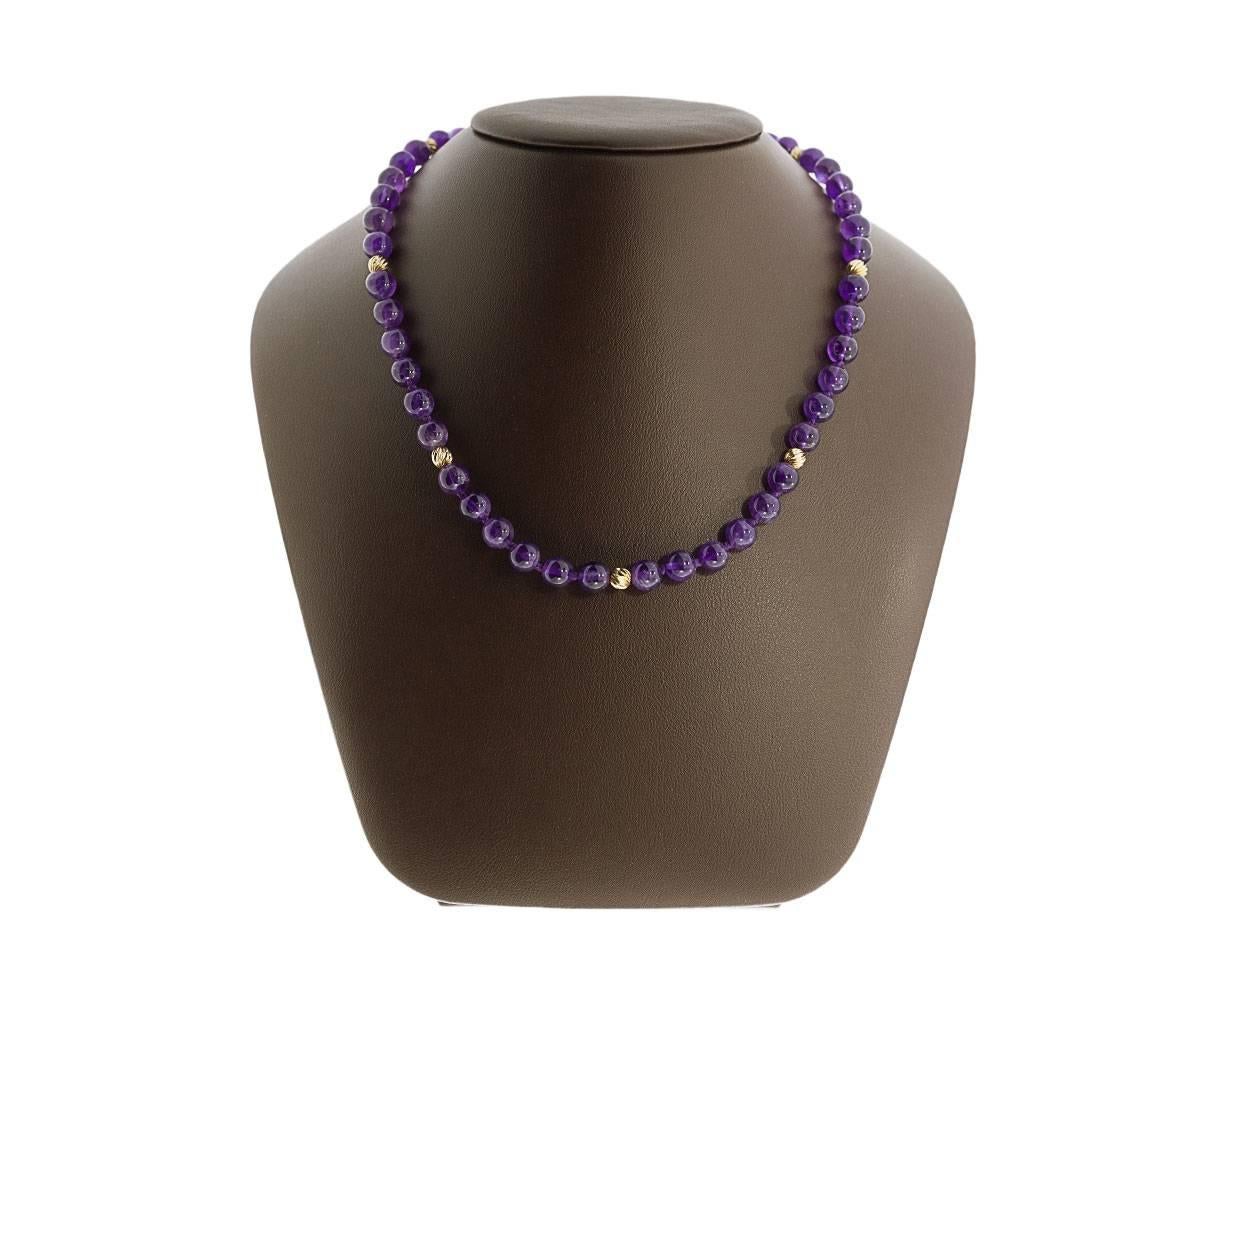 Description:
8mm Amethyst beads
14K Yellow Gold beads
hook and slide locking clasp
18 Inch length
Reg: $1300
Comes in a beautiful presentation box
An adult signature will be required for delivery unless other arrangements are made prior to purchasing